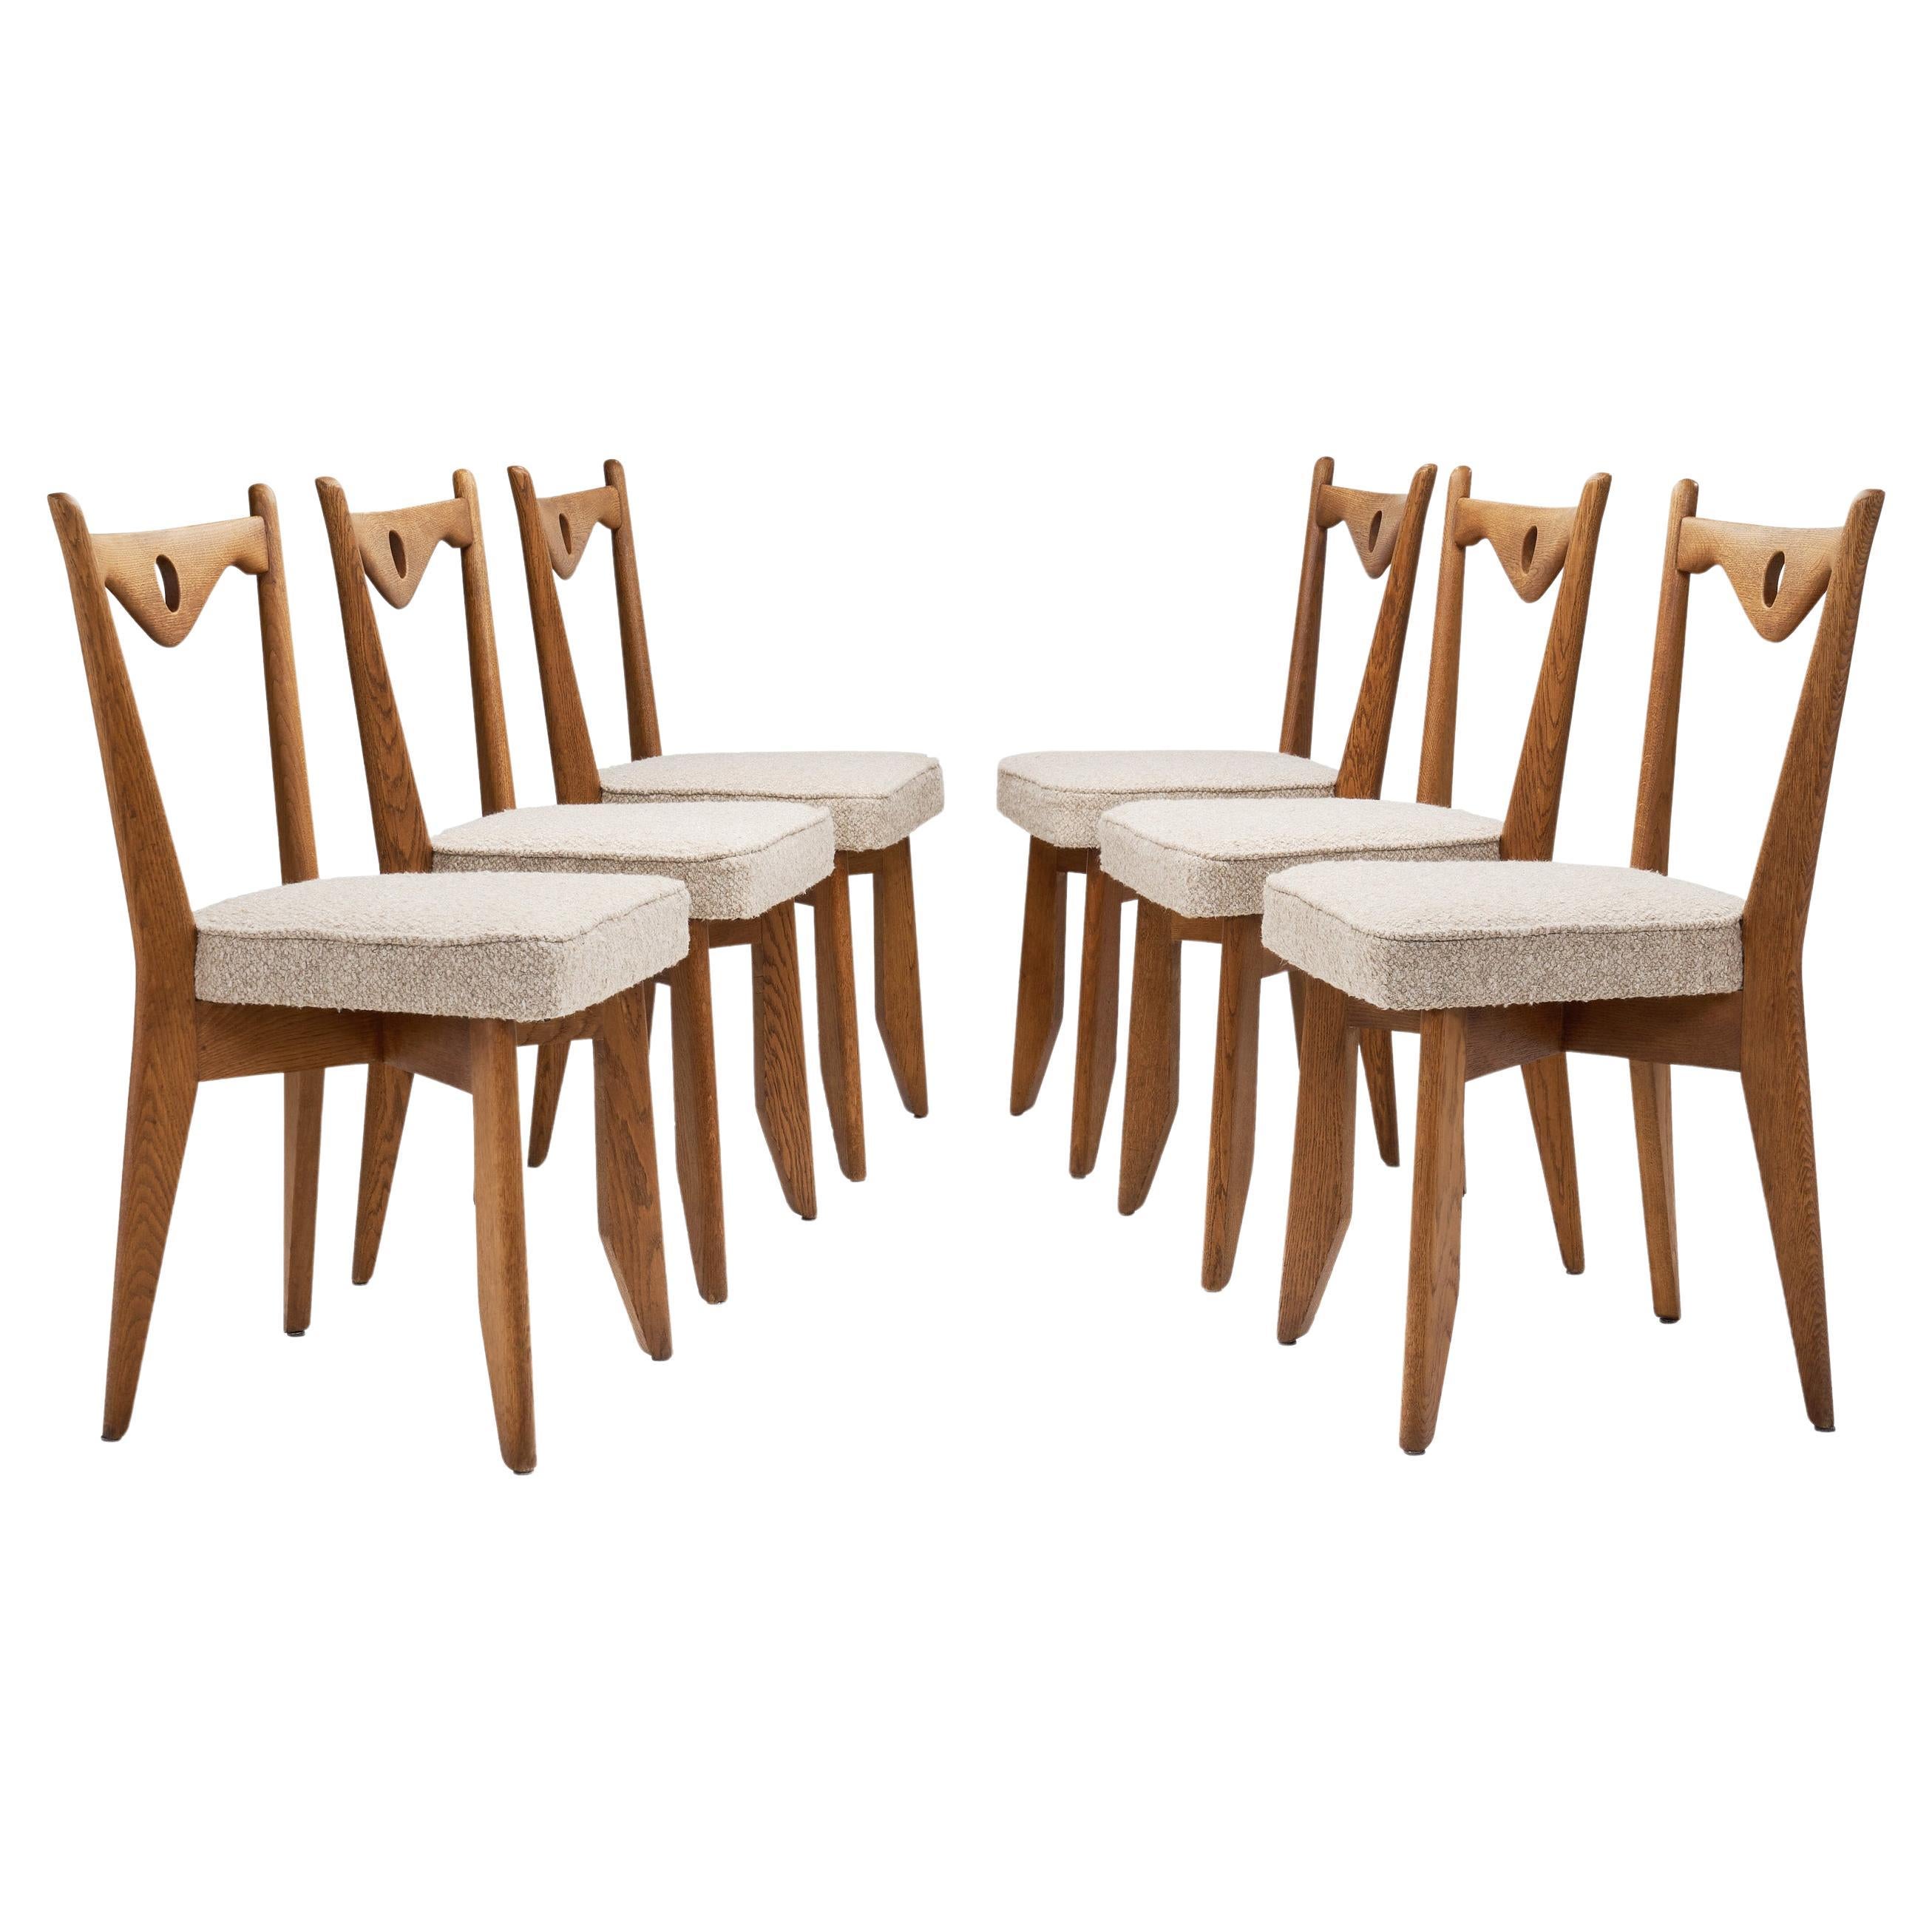 Guillerme et Chambron Rare Set of Oak Chairs with Seats in Bouclé, France 1960s